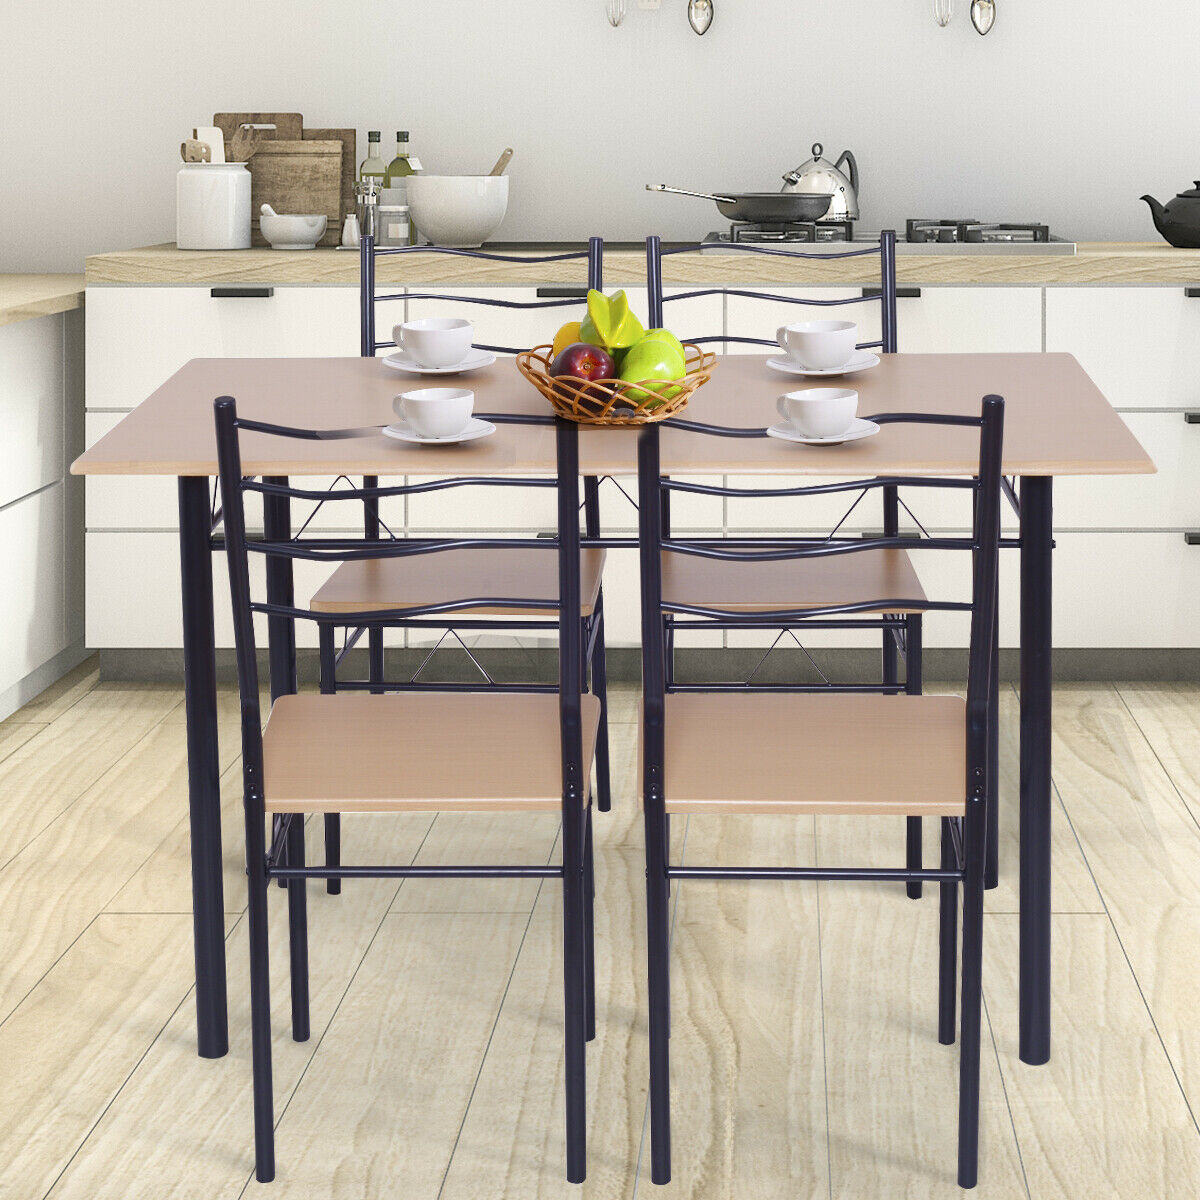 Costway 5 Piece Dining Table Set 29.5" with 4 Chairs Wood Metal Kitchen Breakfast Furniture Brown - image 3 of 8